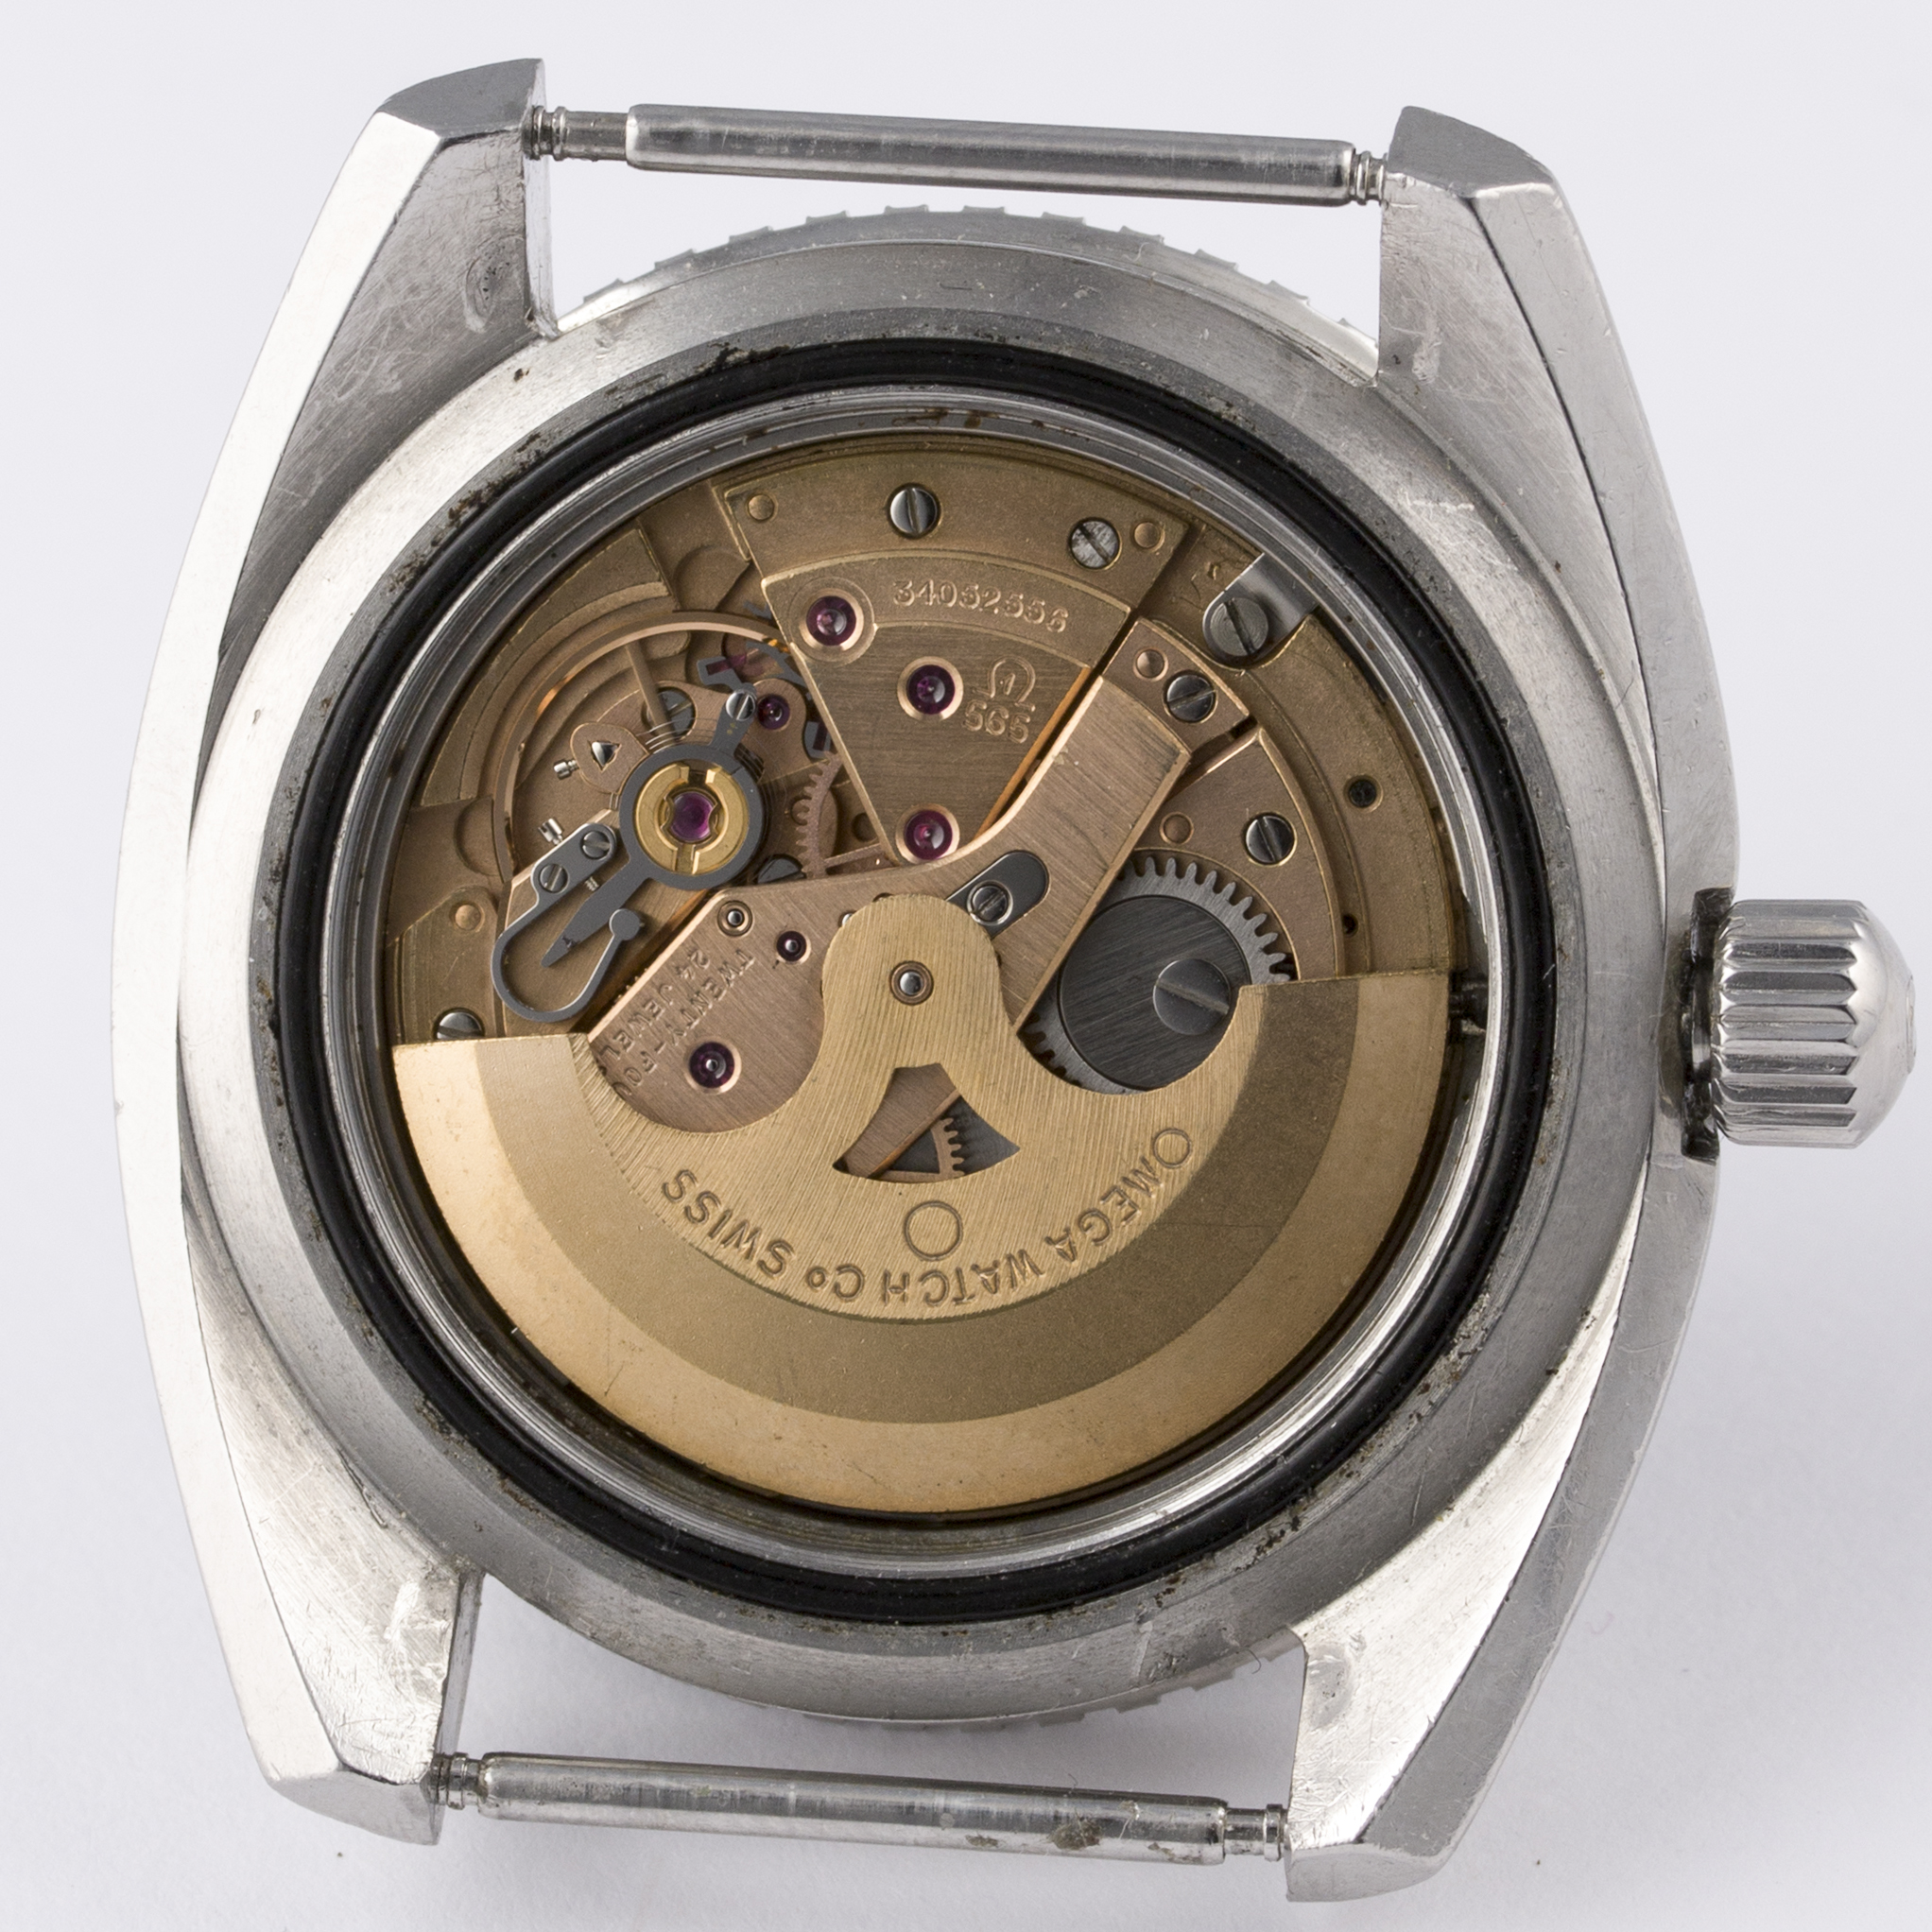 A GENTLEMAN’S STAINLESS STEEL OMEGA SEAMASTER 120 AUTOMATIC WRIST WATCH
CIRCA 1972, REF. 166.073 - Image 7 of 7